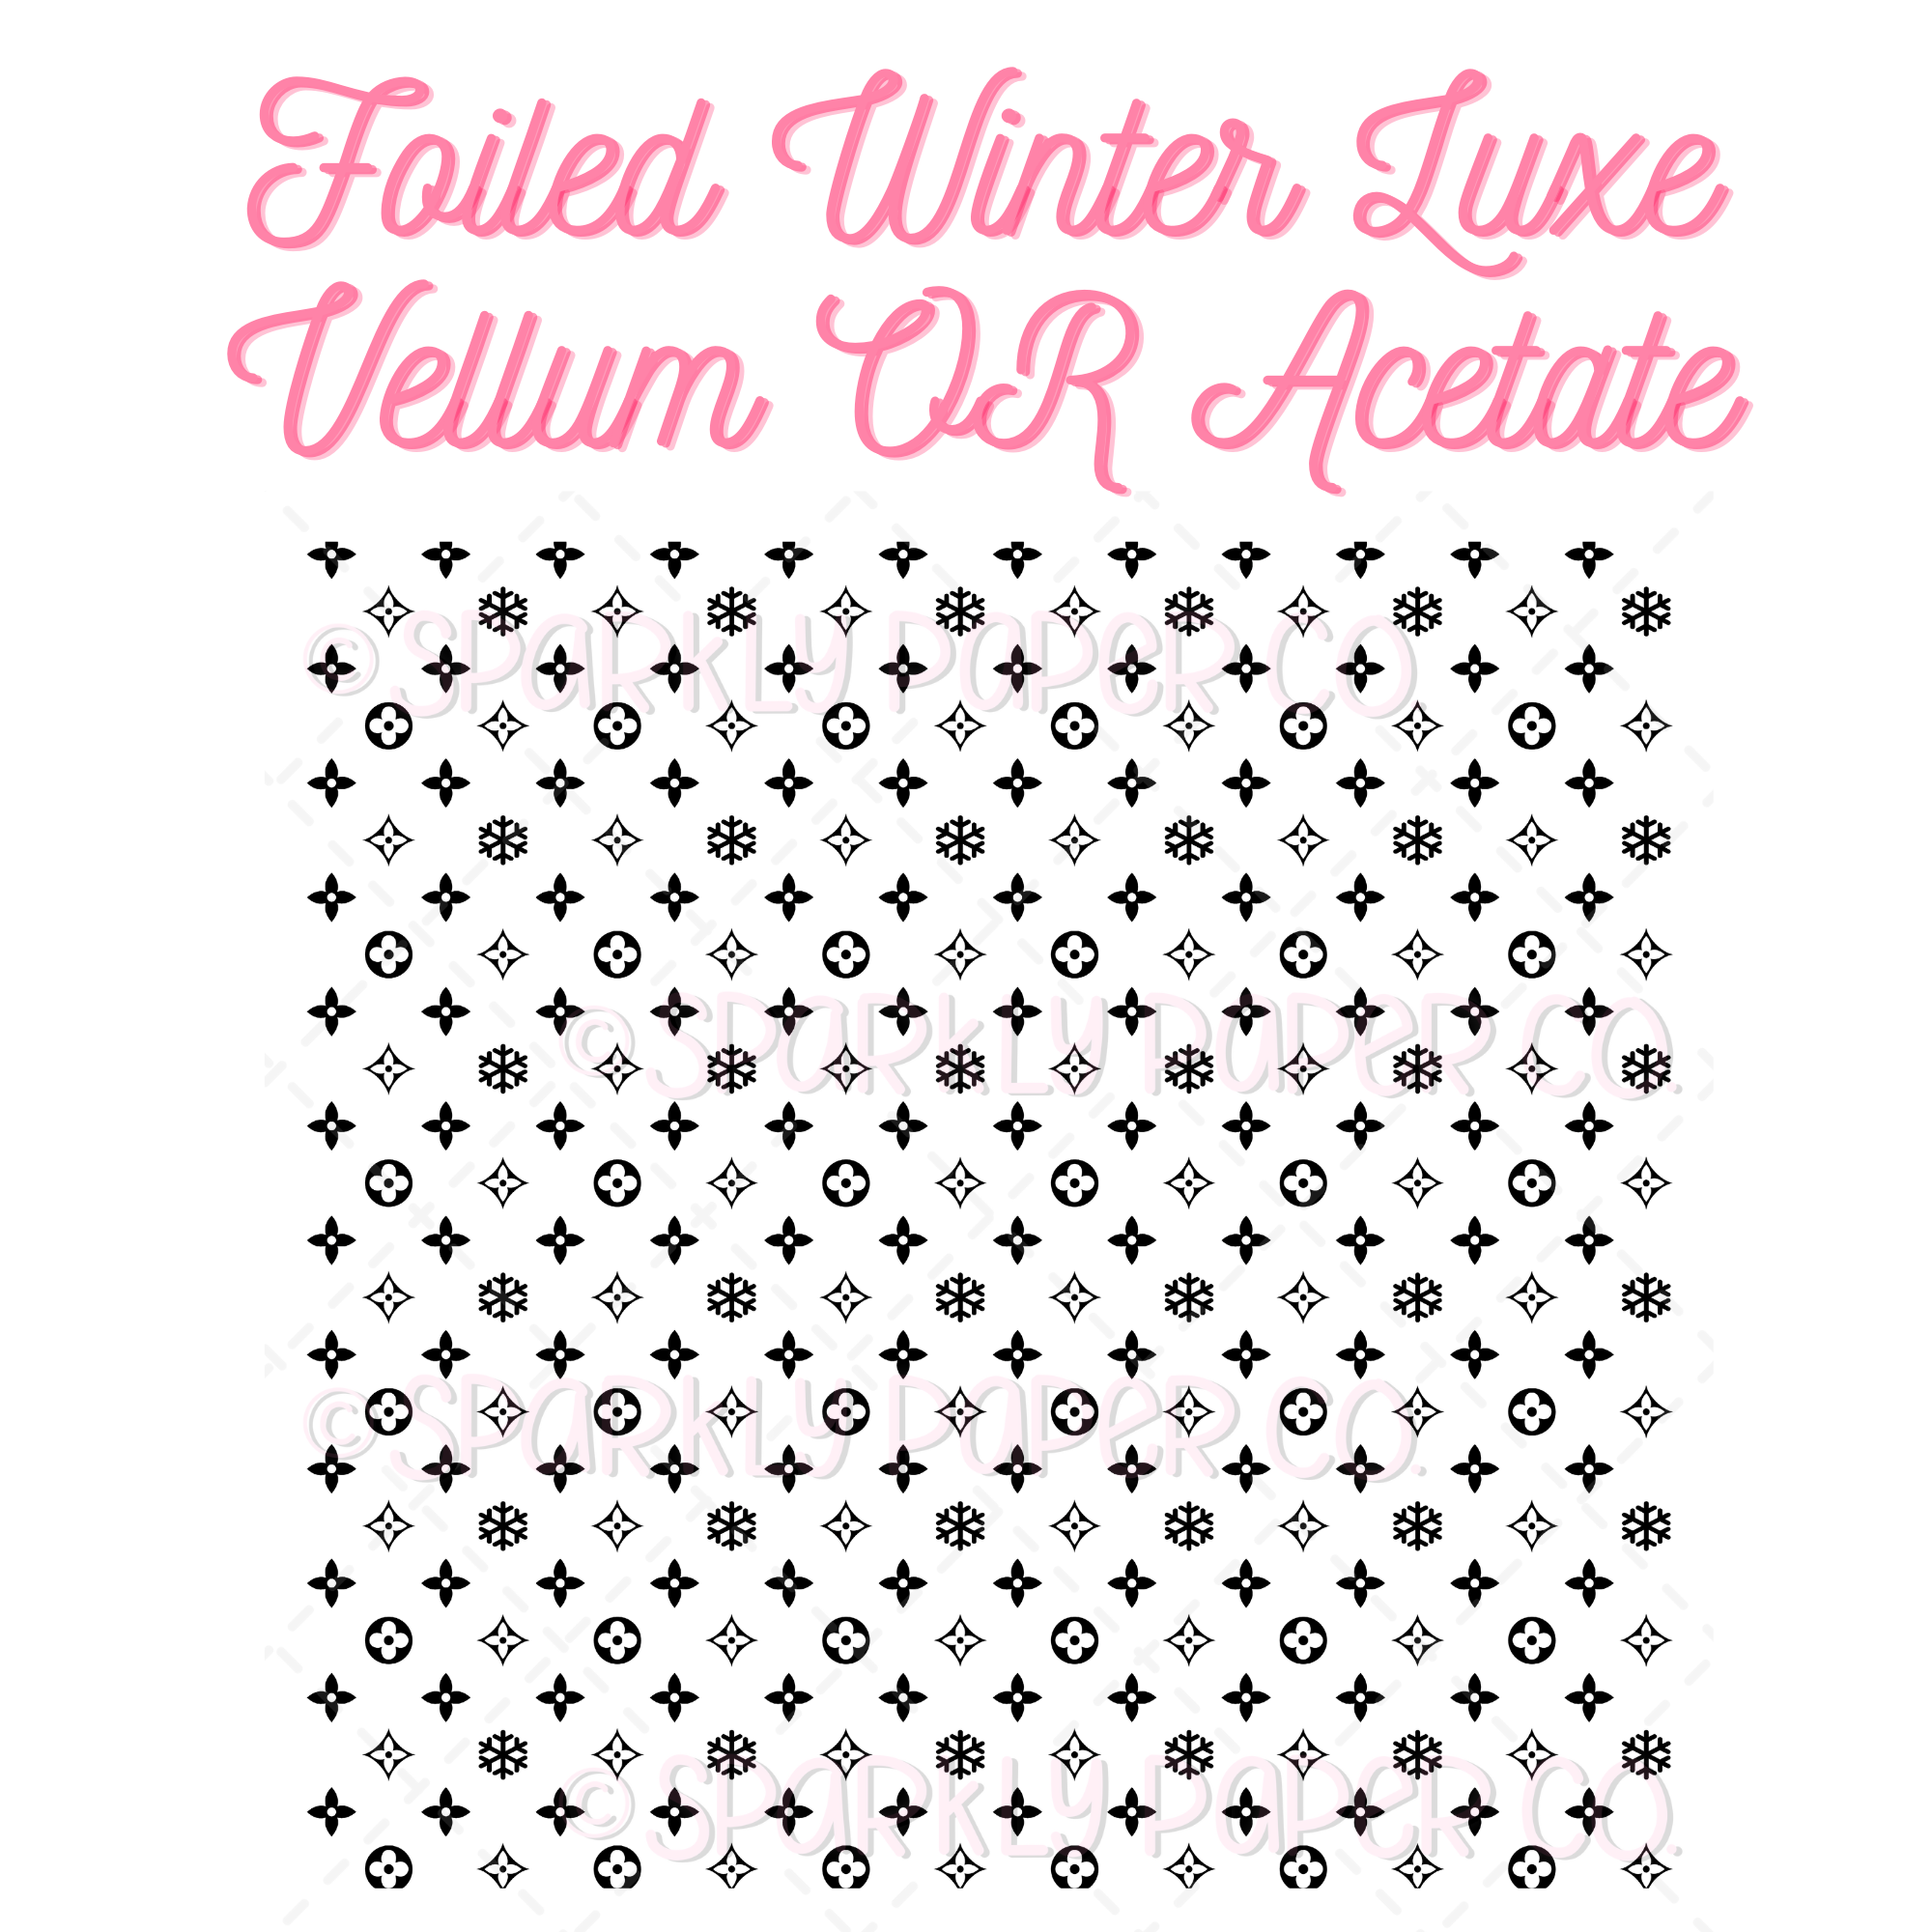 FOILED Winter Luxe Vellum OR Acetate (Limited Edition)